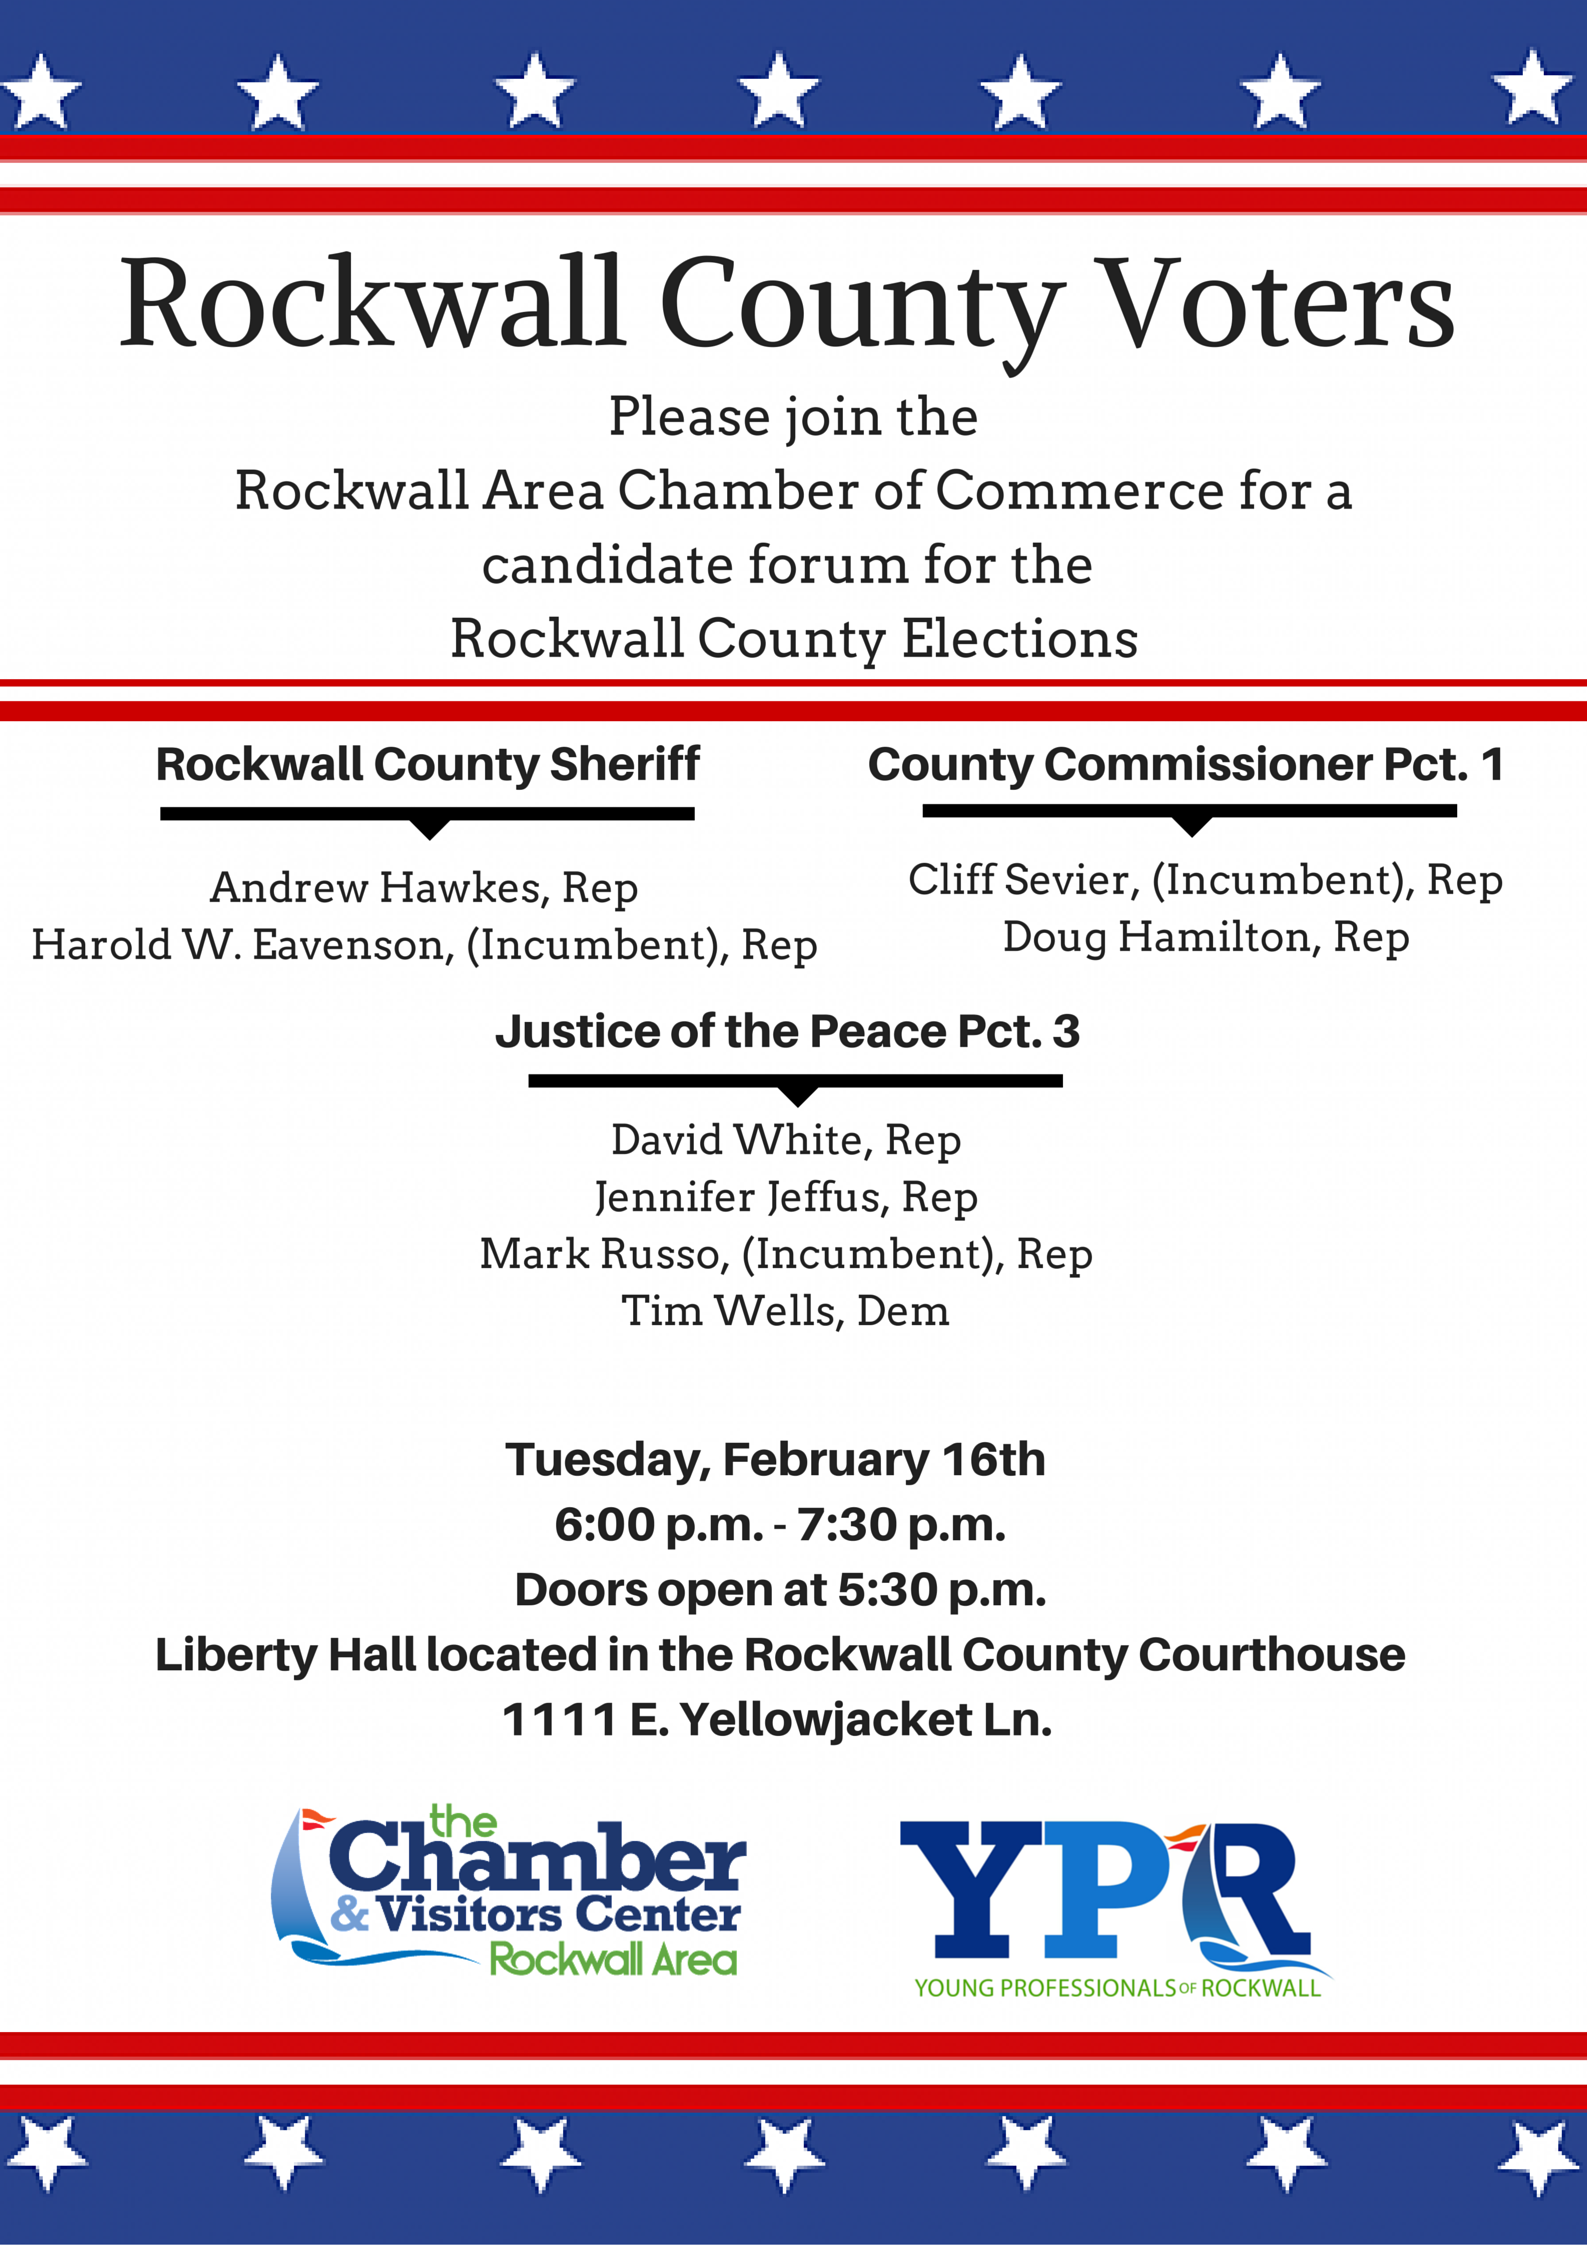 Candidate Forum for Rockwall County Elections